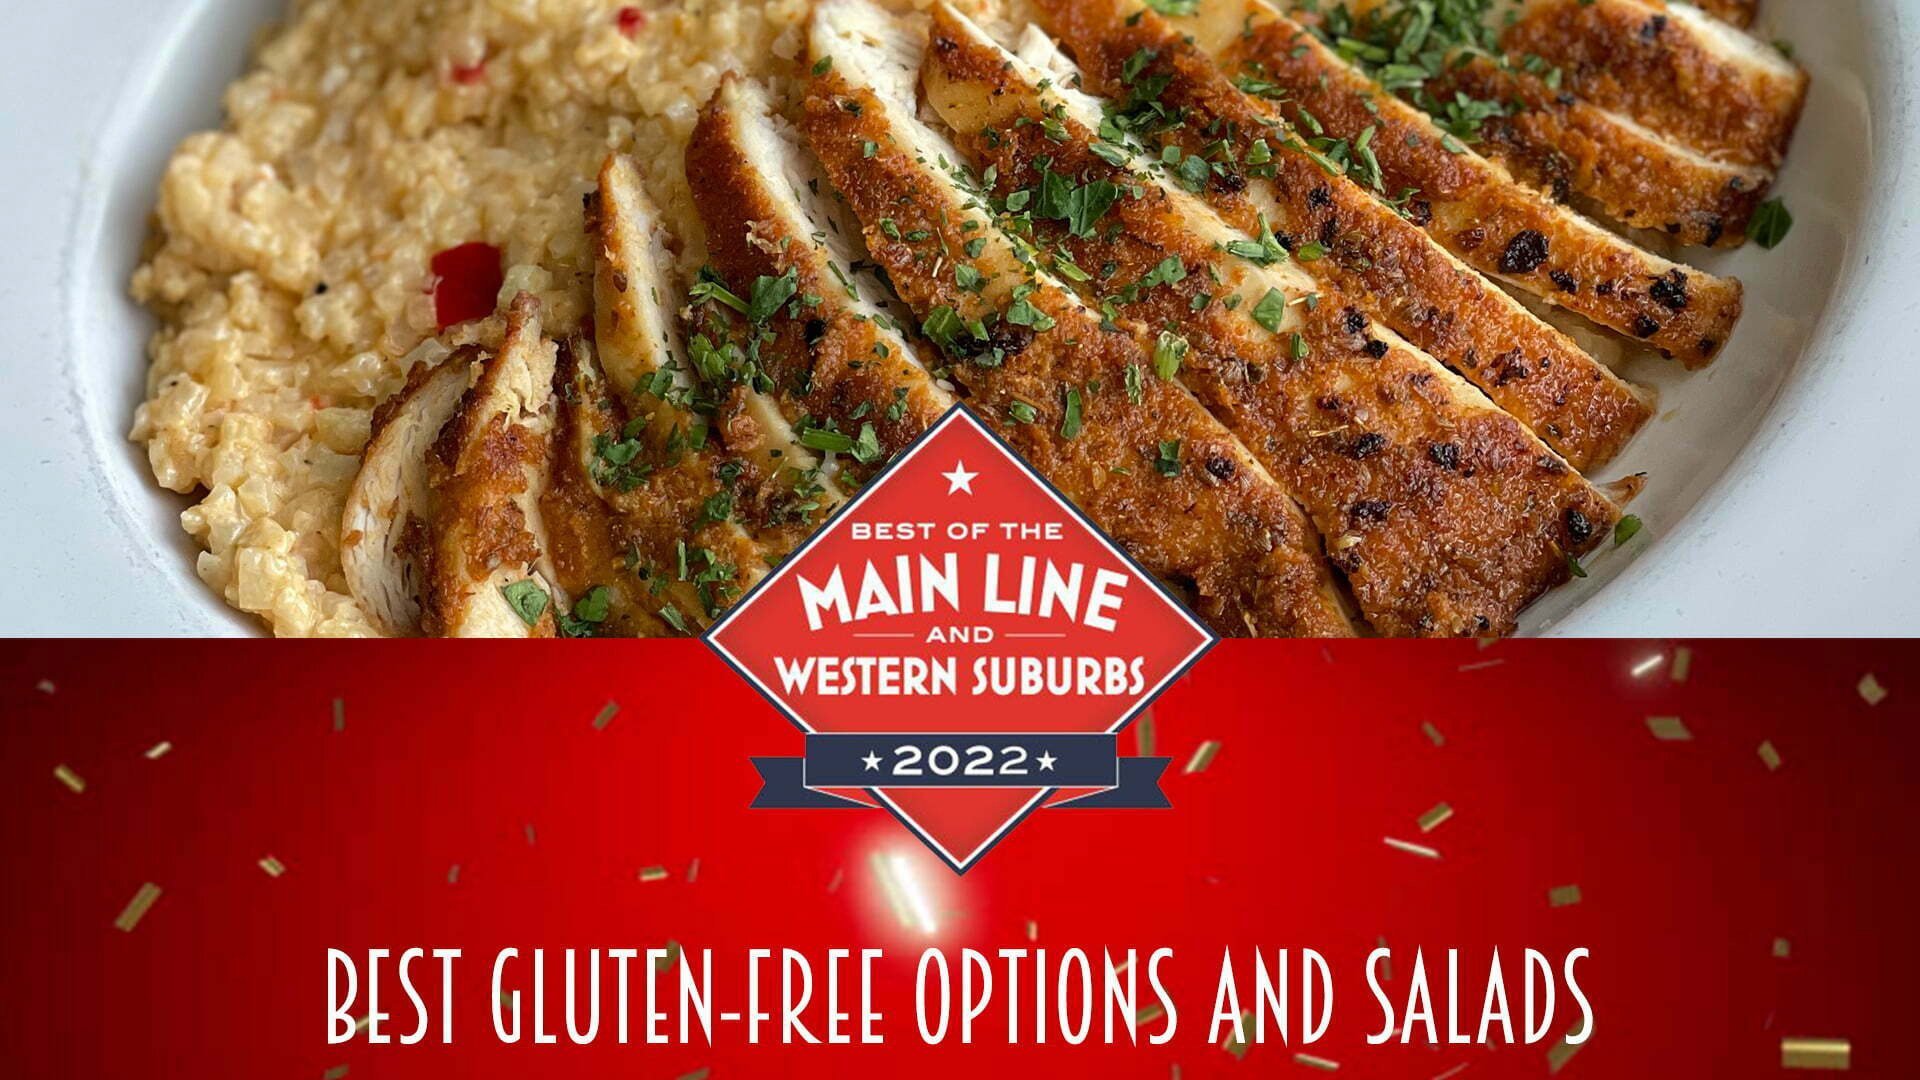 Best Gluten - Free Options and Salads in Exton PA